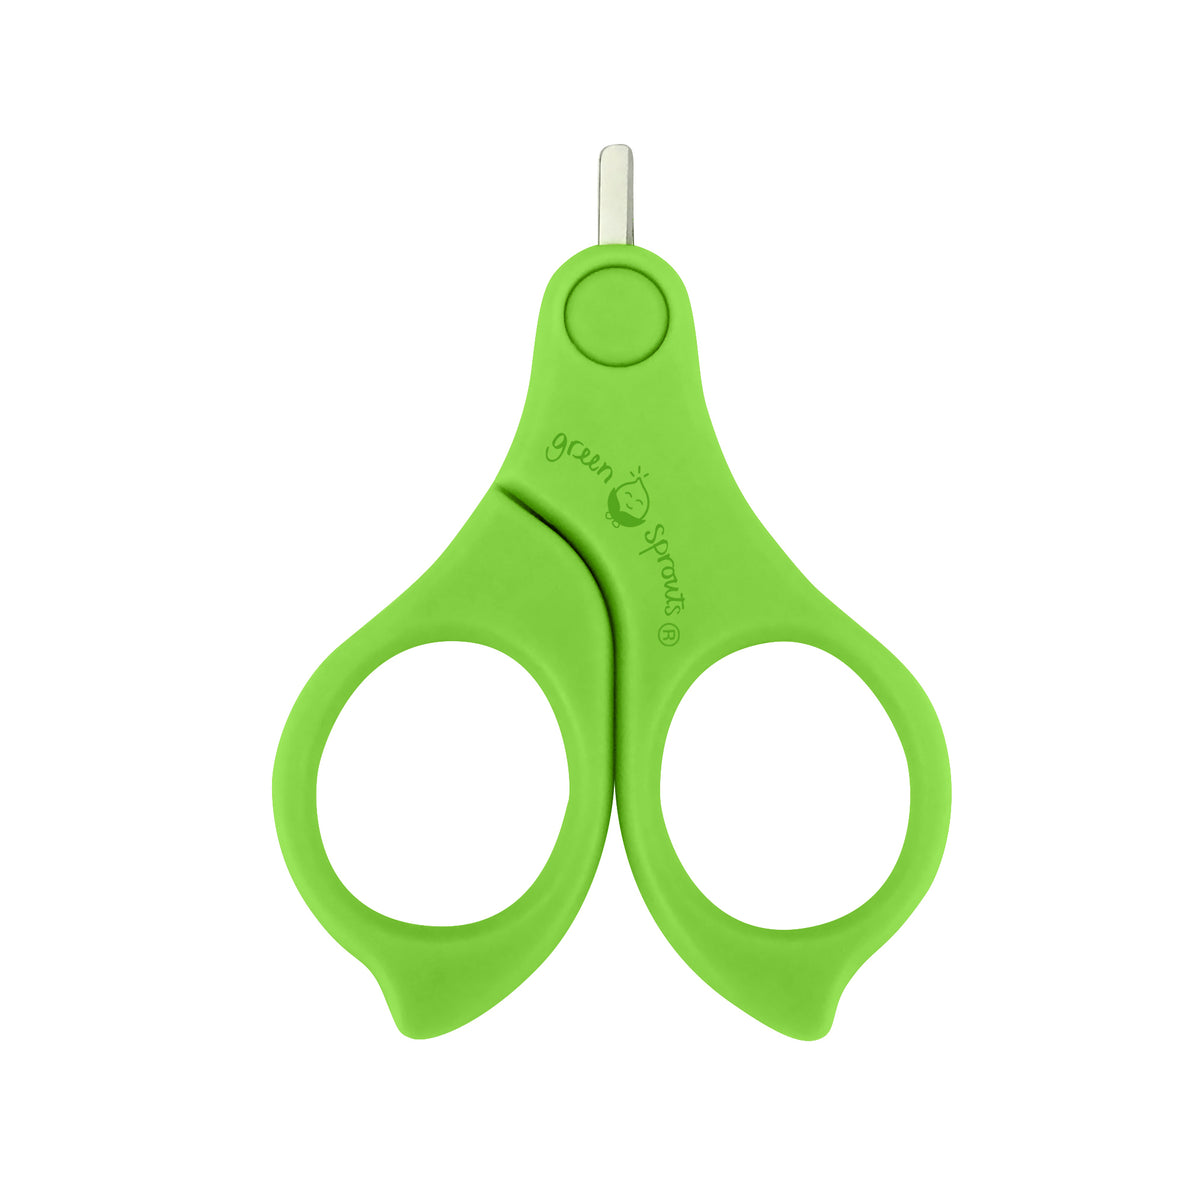 Stainless Steel Baby Safety Scissors Rounded Tips Manicure Newborn Child  Nail